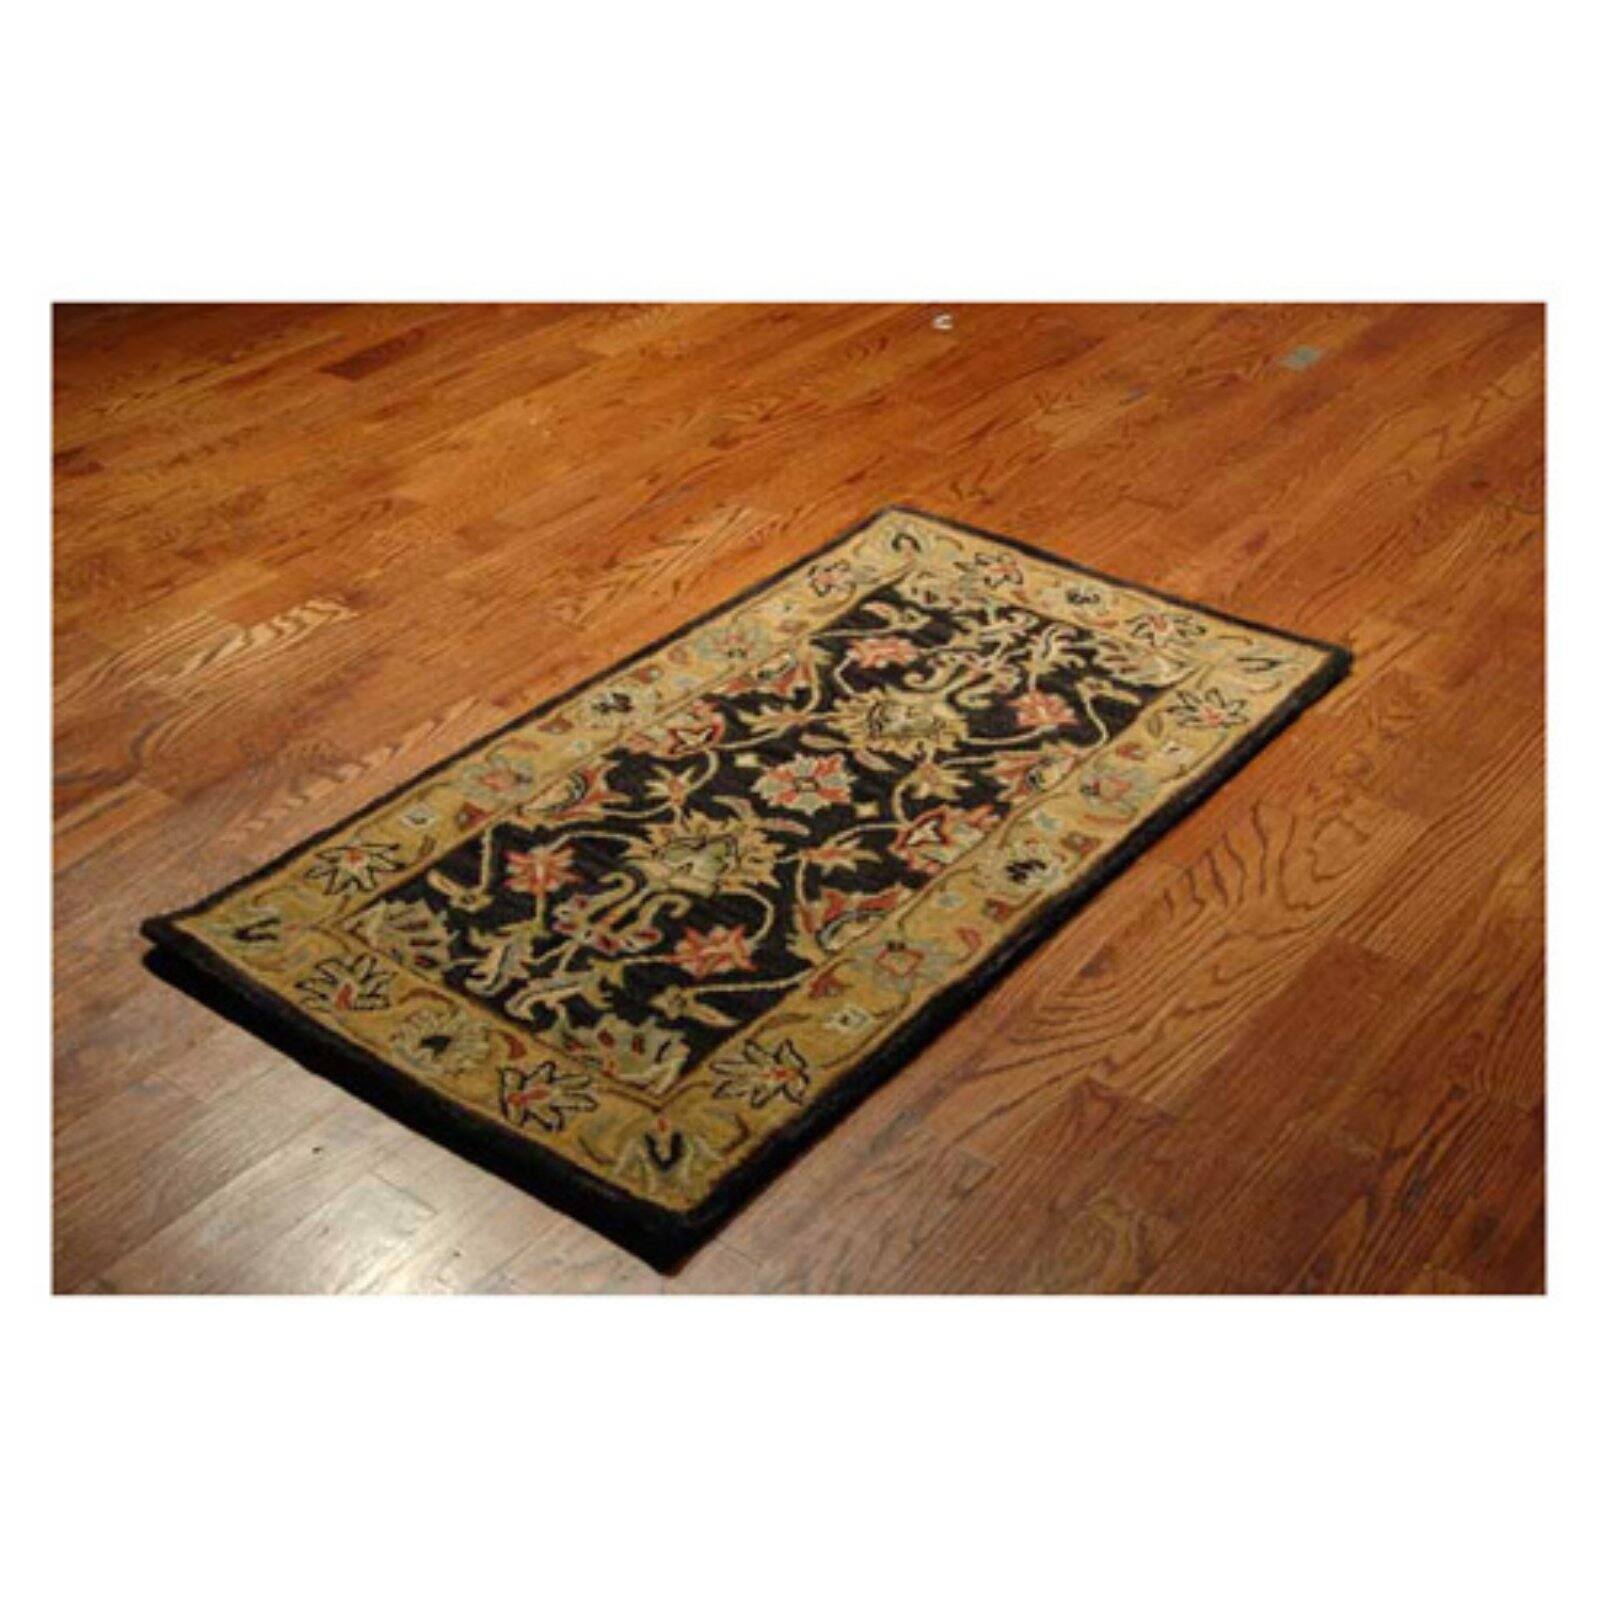 SAFAVIEH Heritage Regis Traditional Wool Area Rug, Charcoal/Gold, 7'6" x 9'6" - image 2 of 10